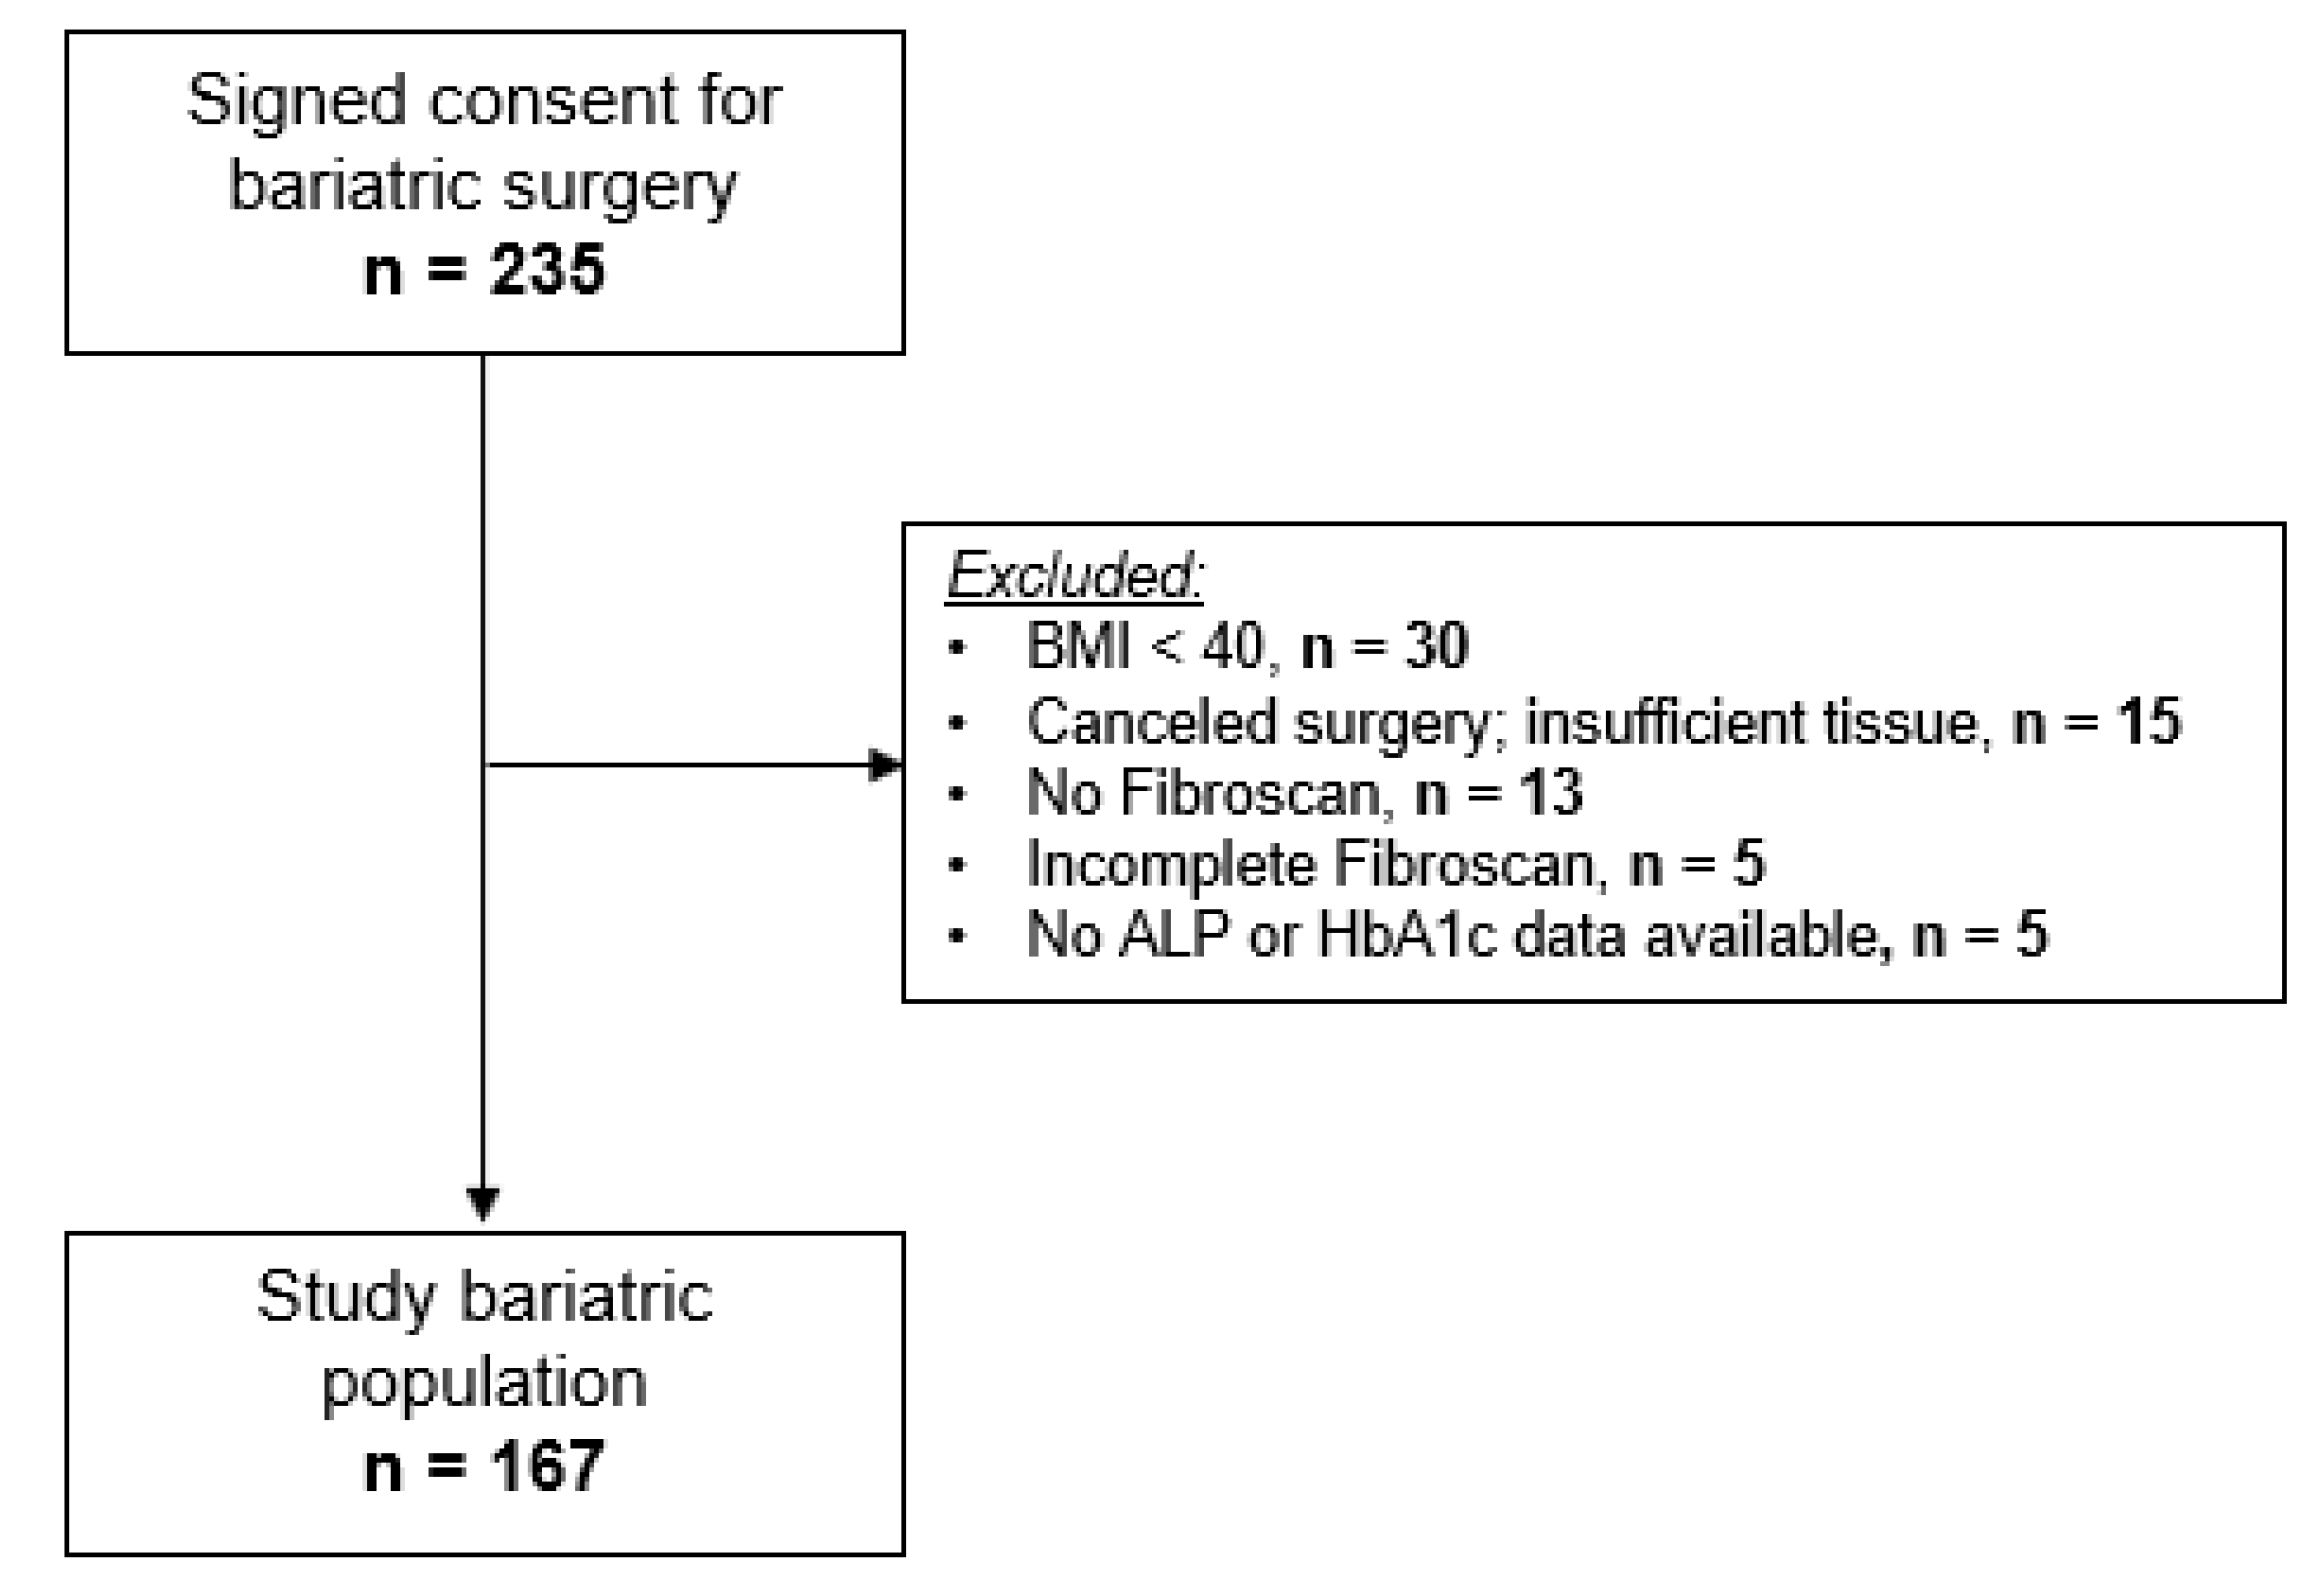 TOOL E3 Measurement and assessment of overweight and obesity